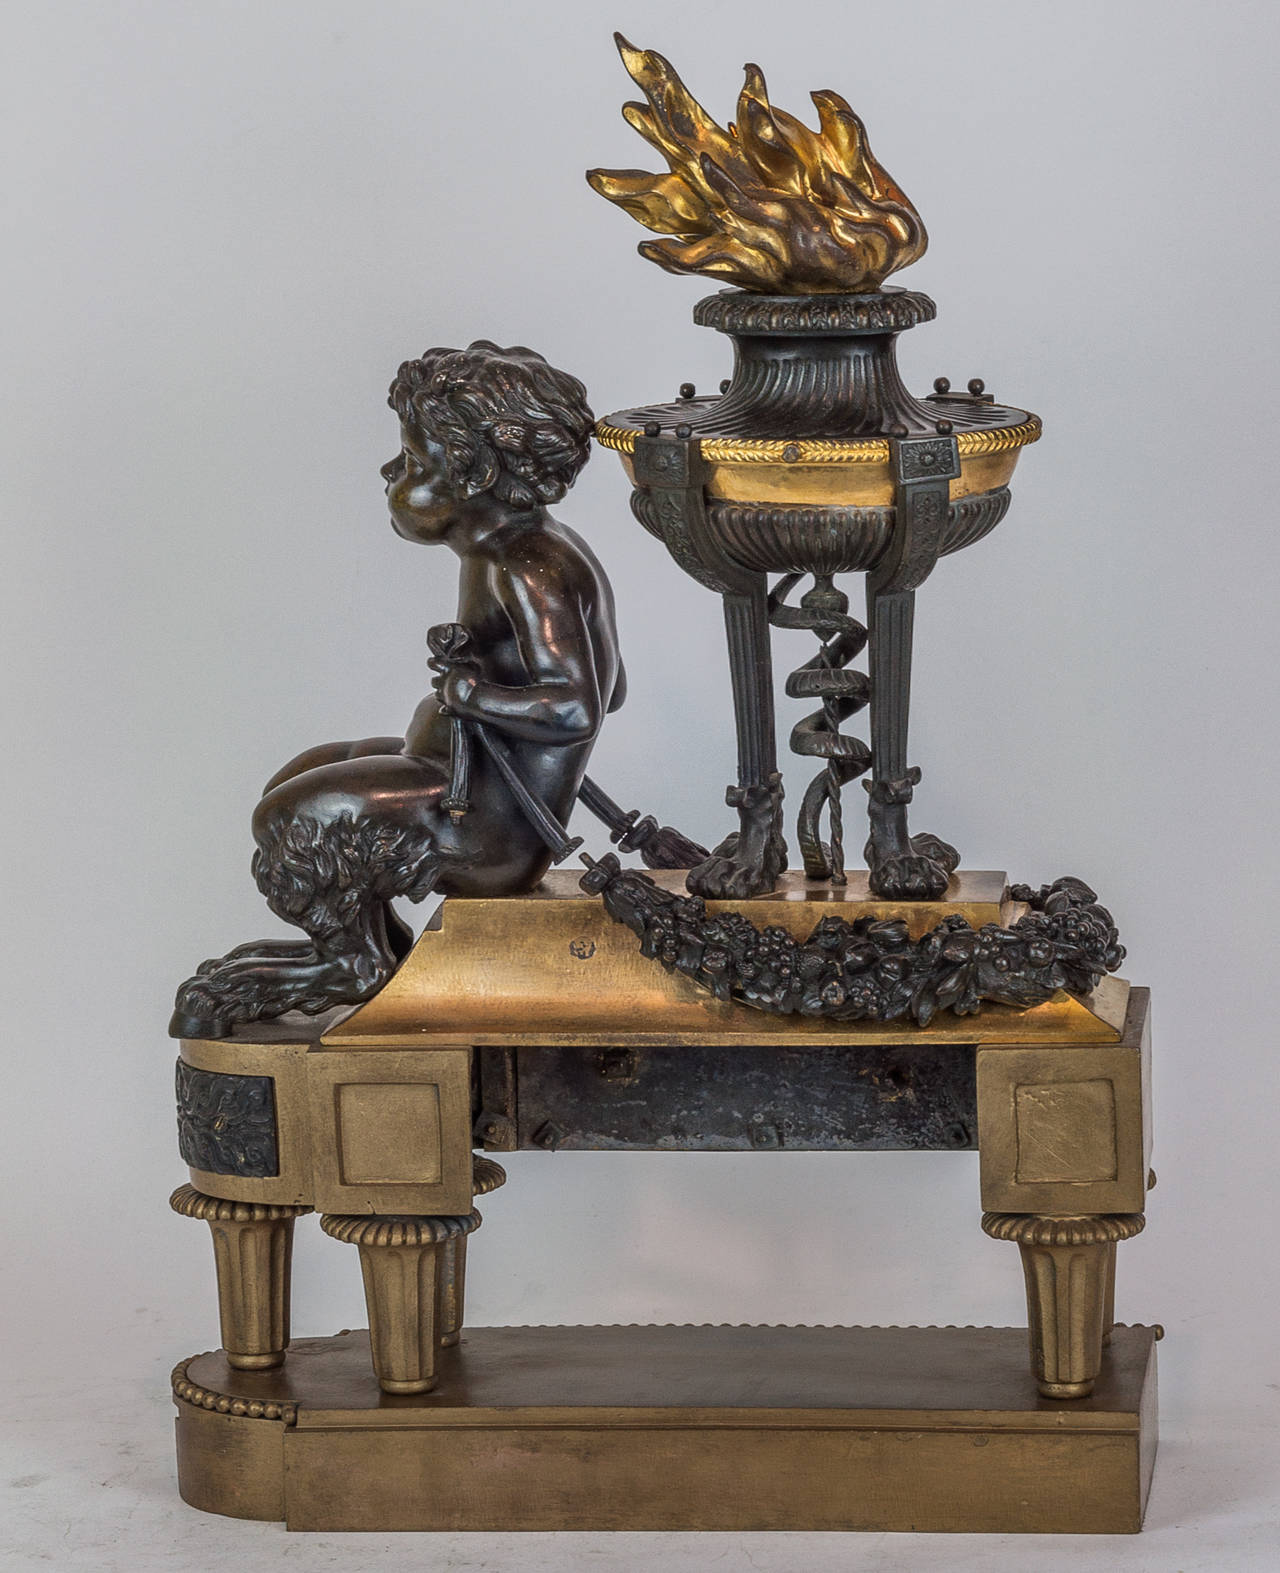 Pair of two-toned bronze figural fireplace chenets
Stock number: MF6.